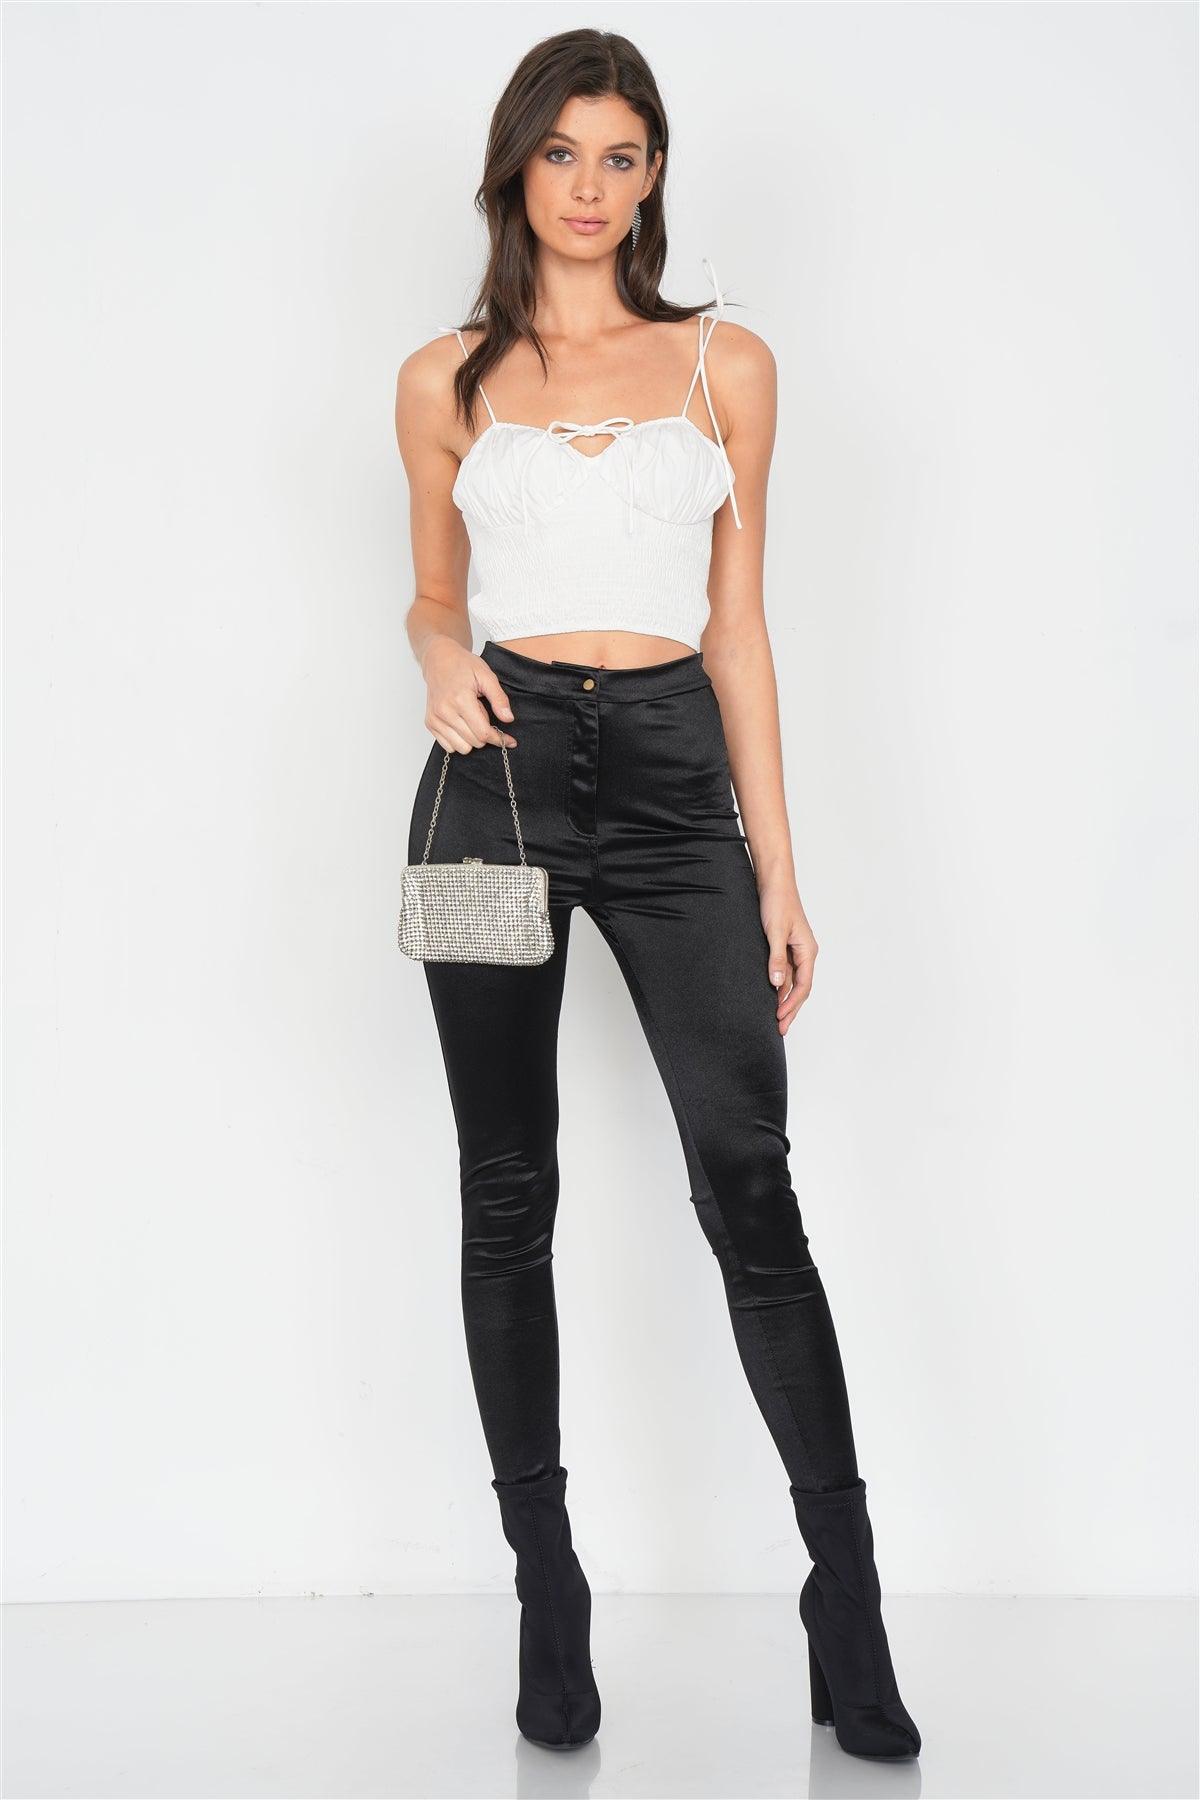 Off-White Ruched Bustier Elasticized Crop Top /3-2-1